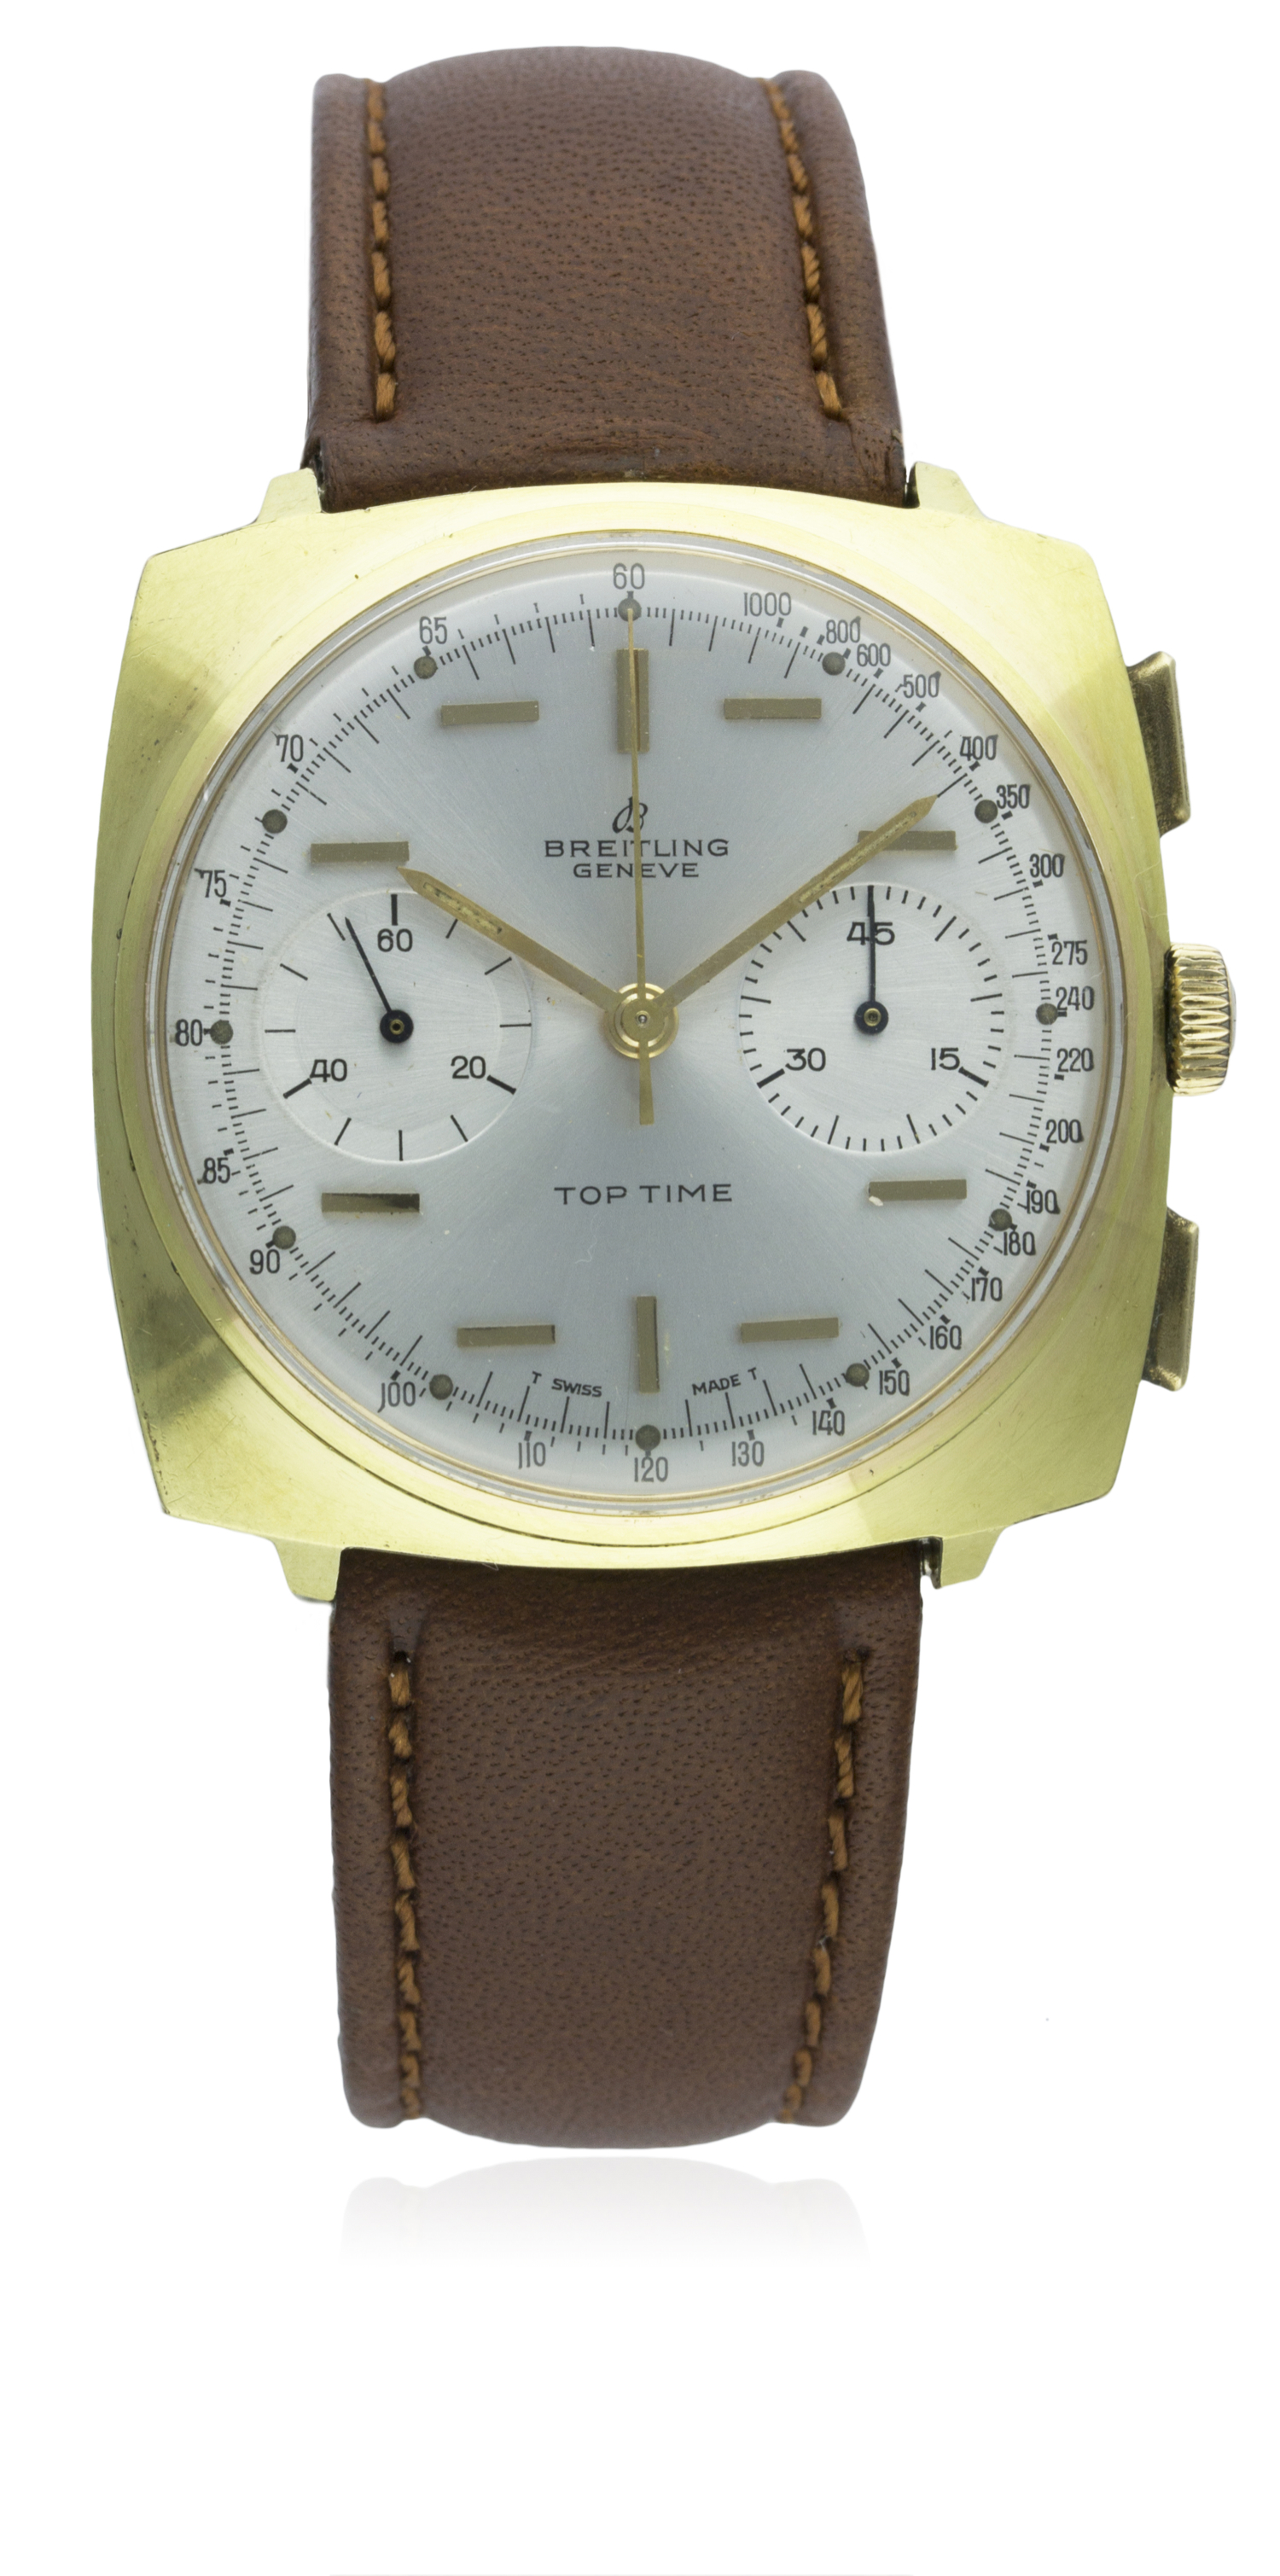 A GENTLEMAN'S GOLD PLATED BREITLING TOP TIME CHRONOGRAPH WRIST WATCH CIRCA 1970, REF. 2008 D: Silver